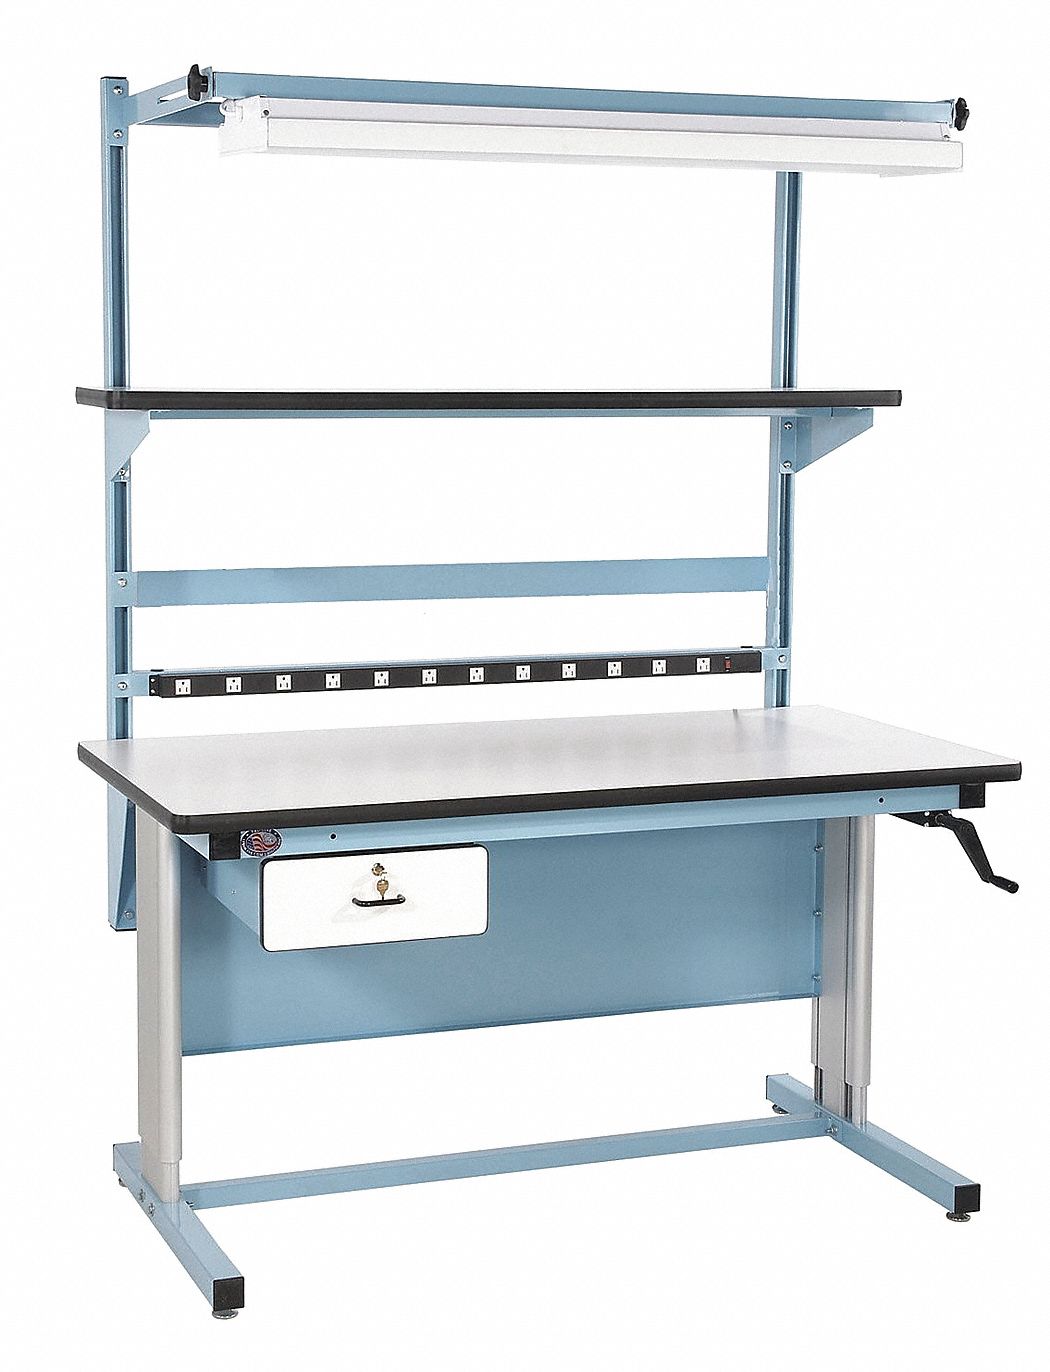 Workbench Complete – THE INDUSTRIAL LEAD